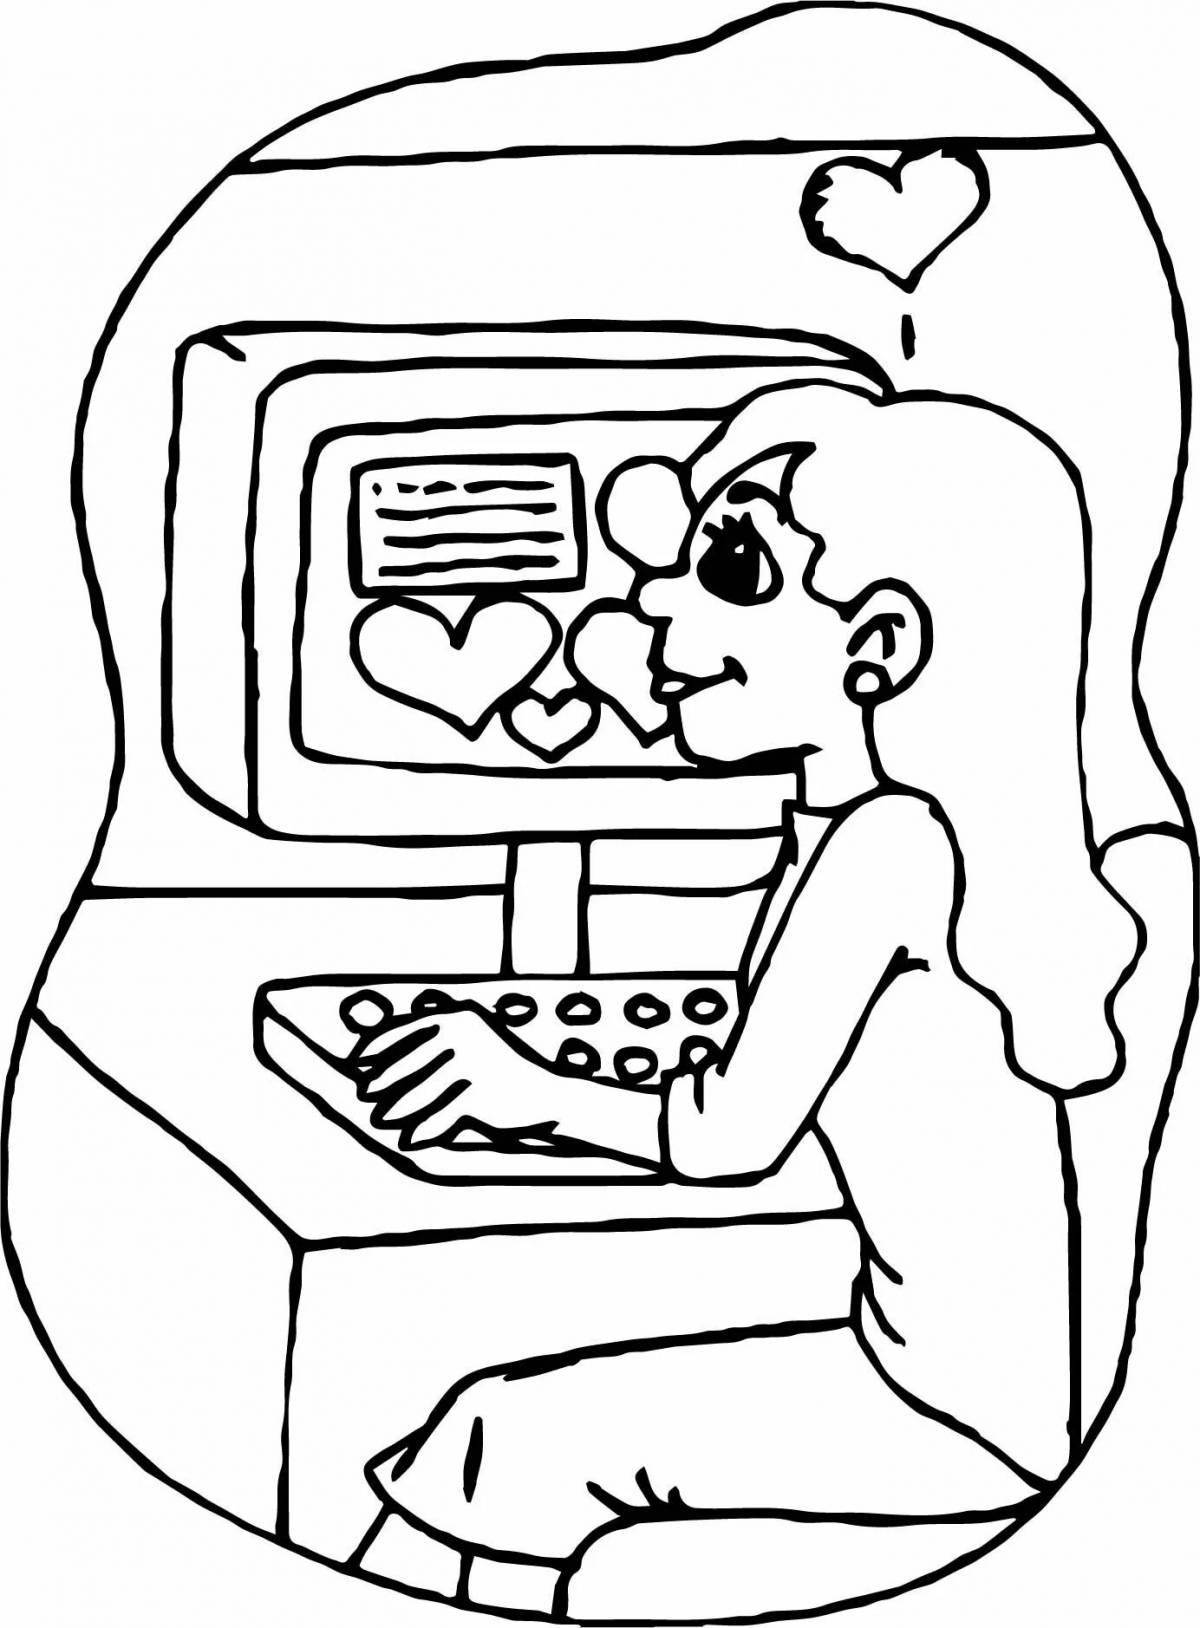 Playful child and computer coloring